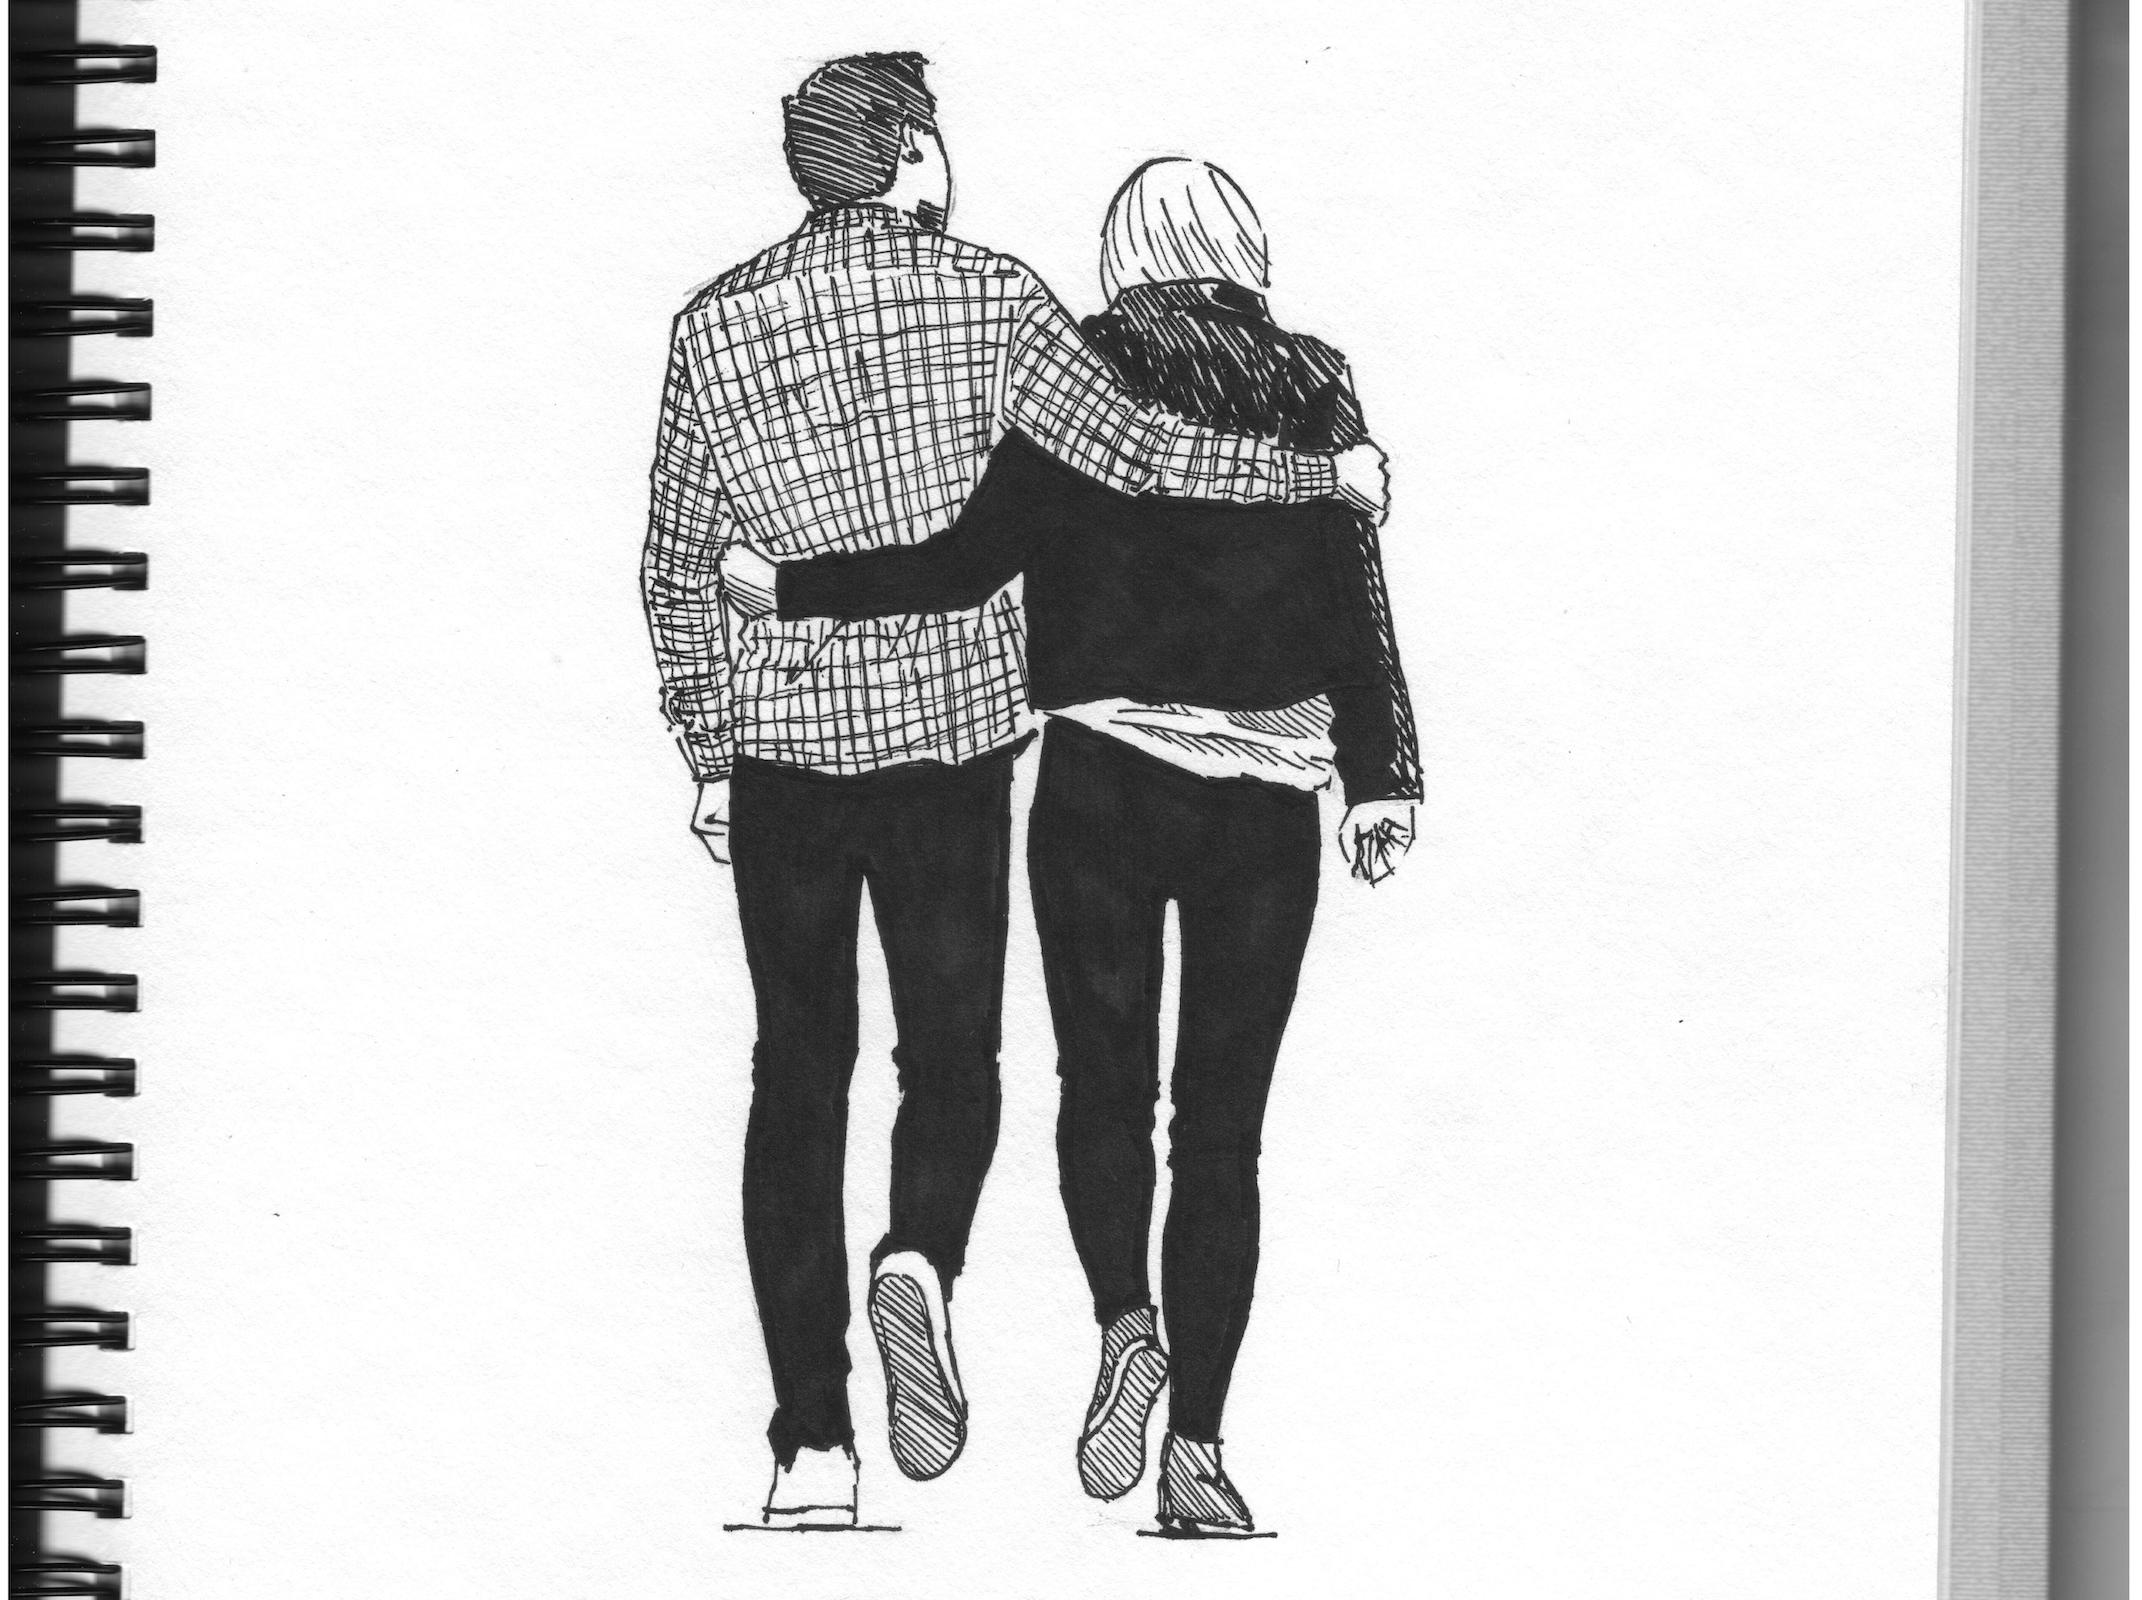 How to Sketch People book example - A sketch of a couple hugging